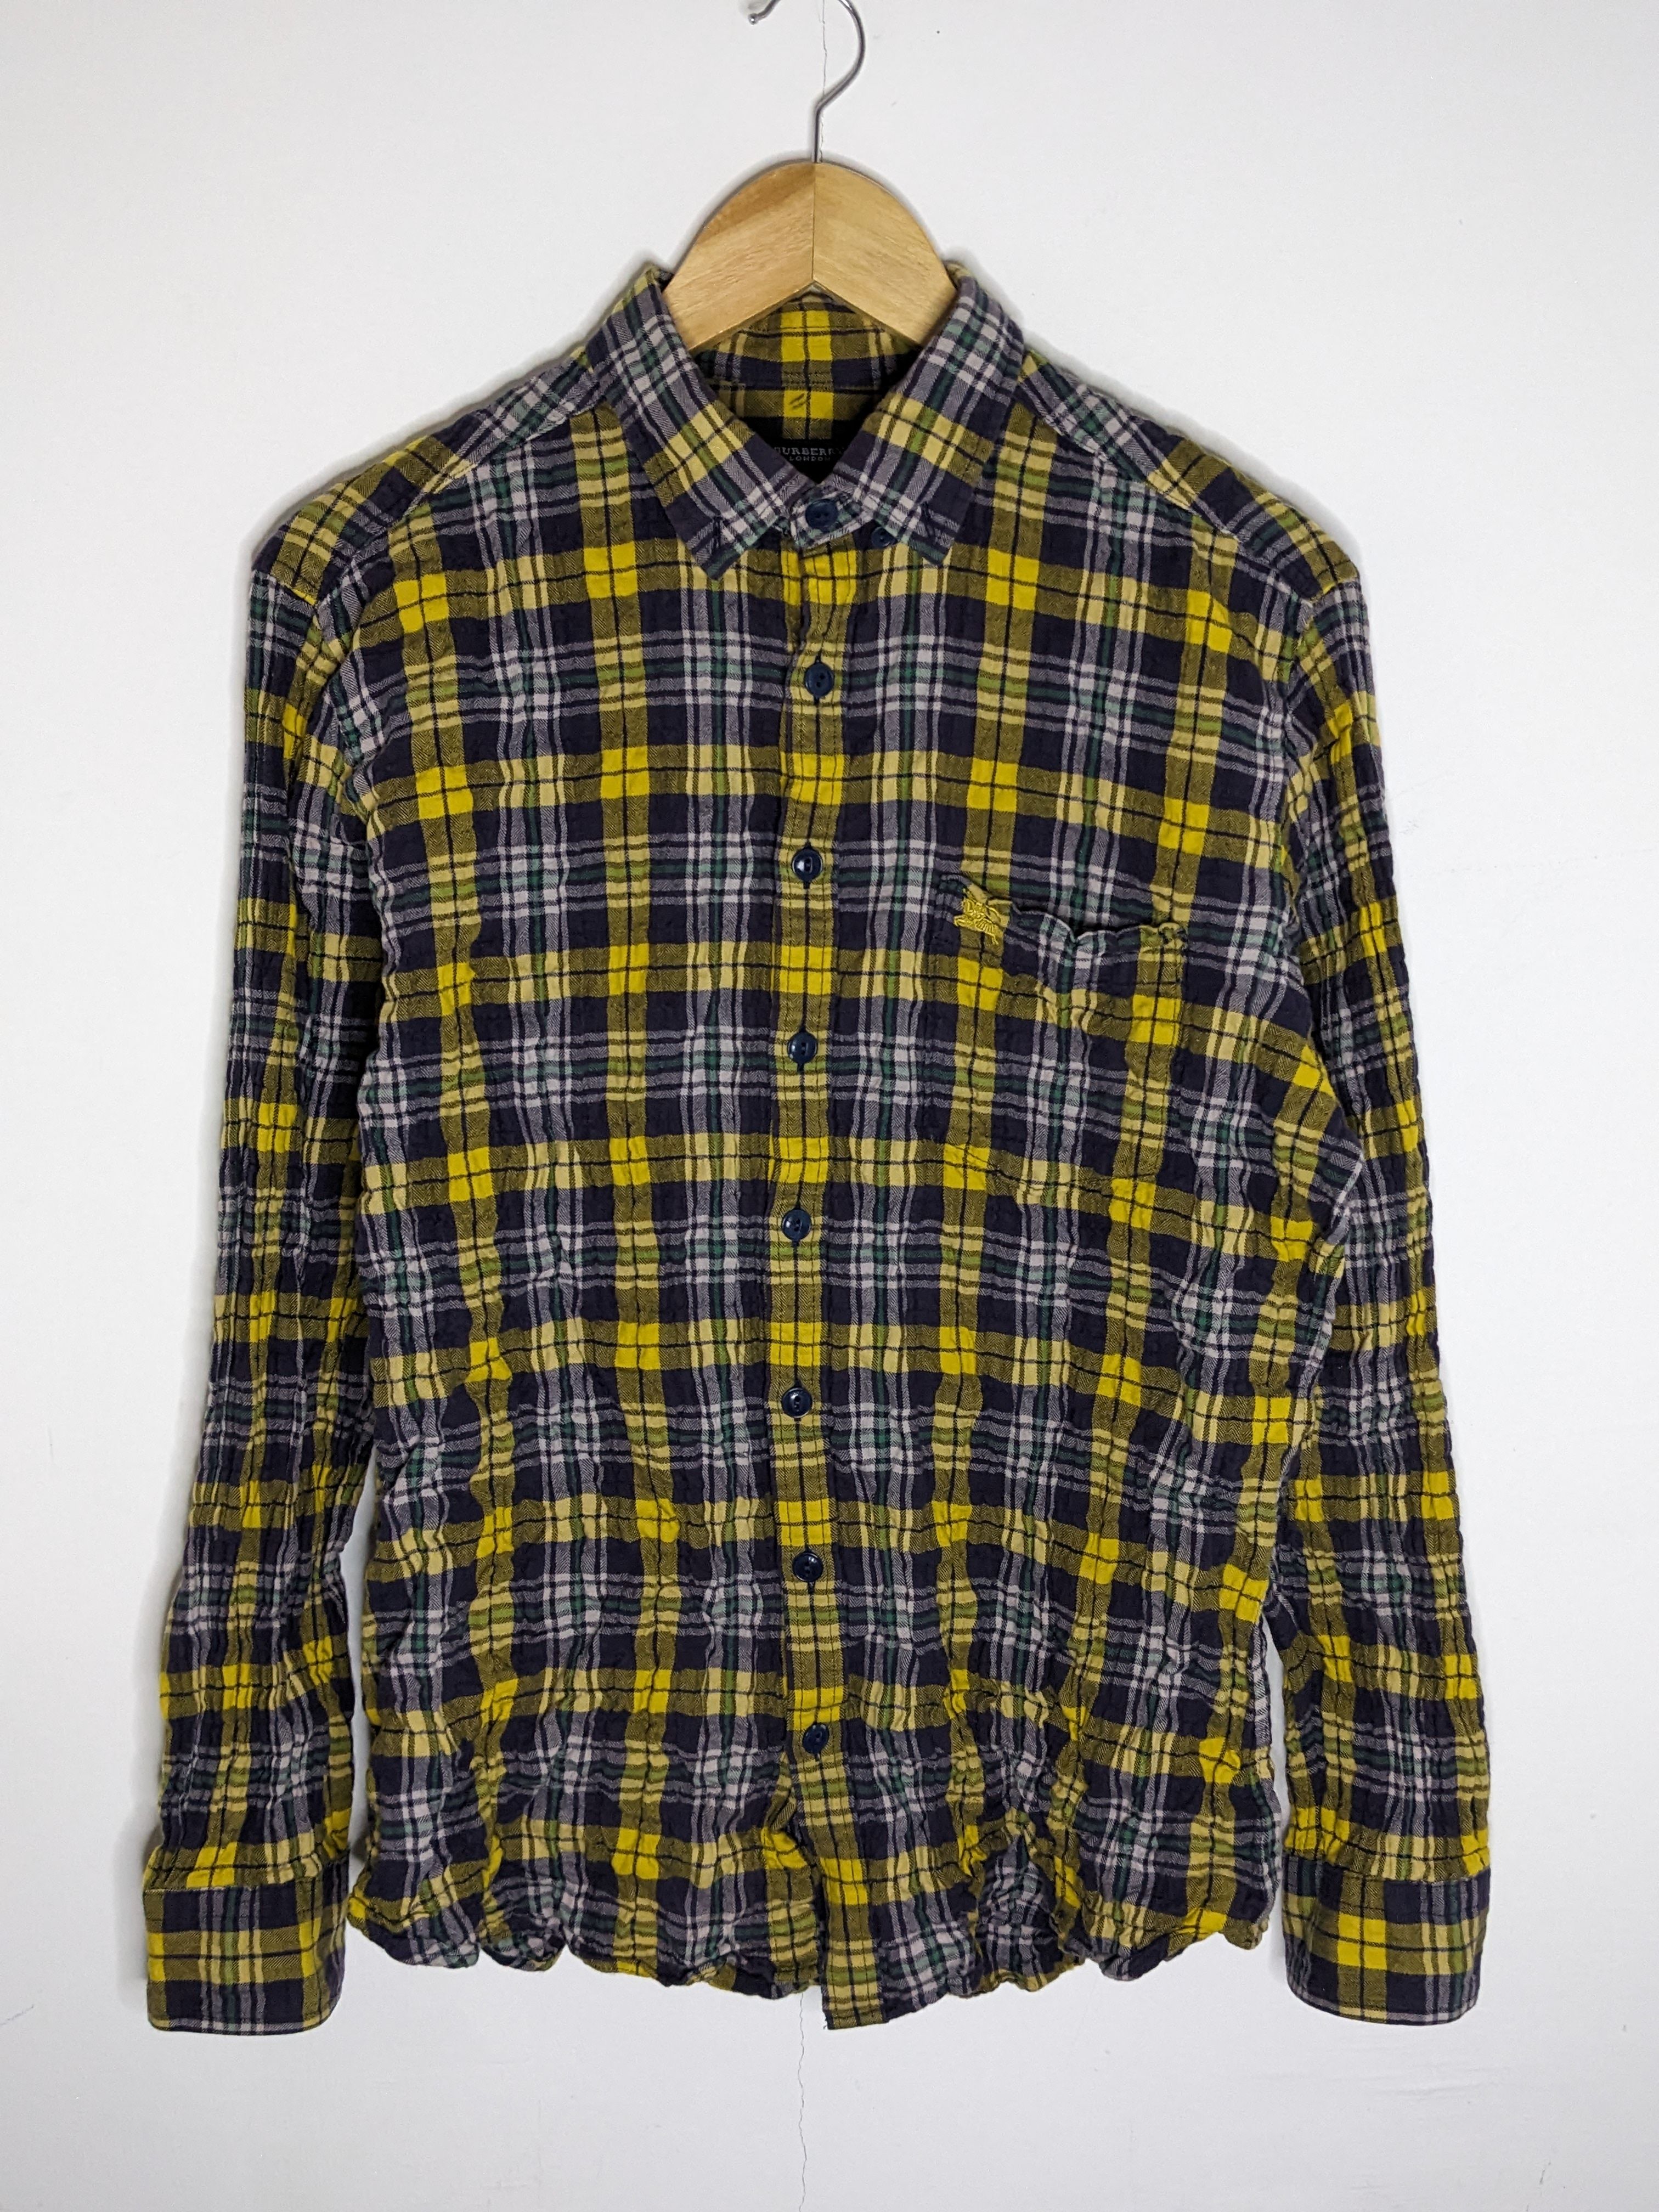 Burberry London Wrinkle Style Checked Plaid Flannel Shirt - 3